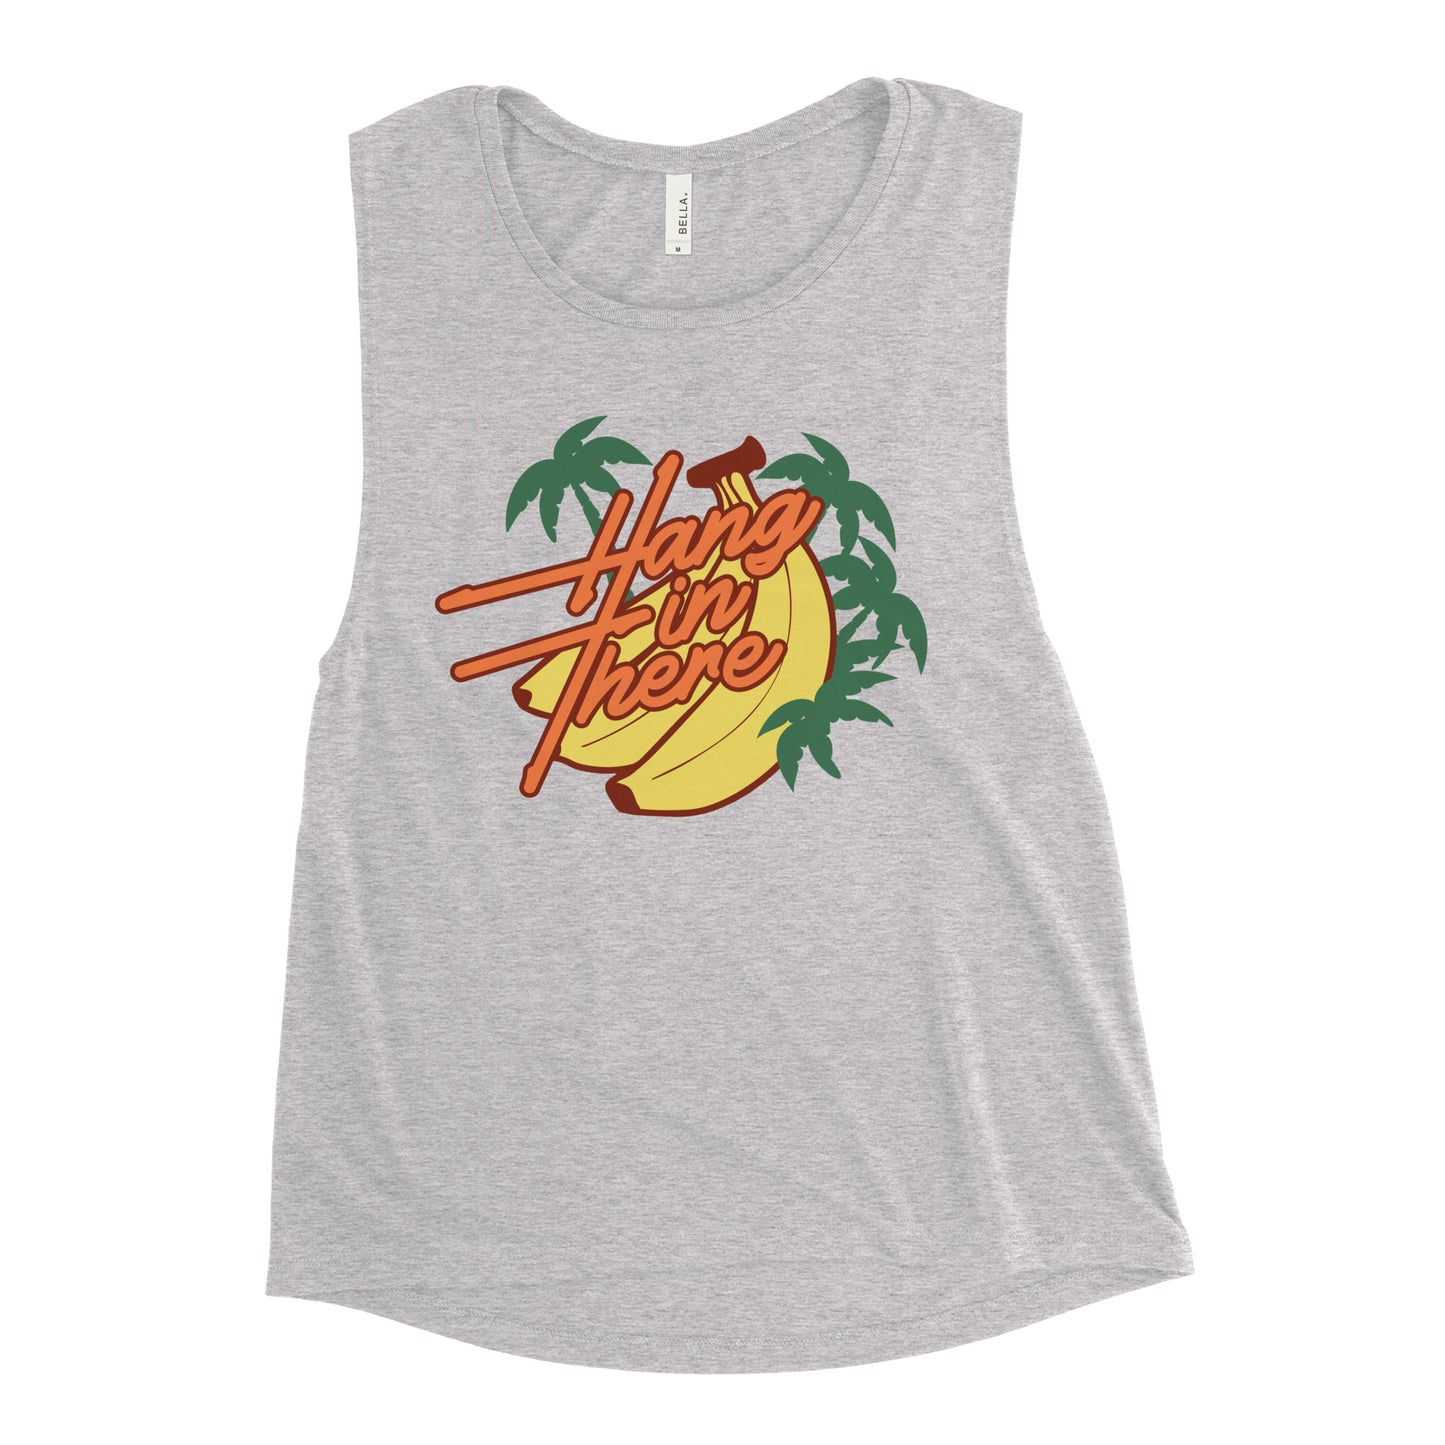 Hang In There Women's Muscle Tank